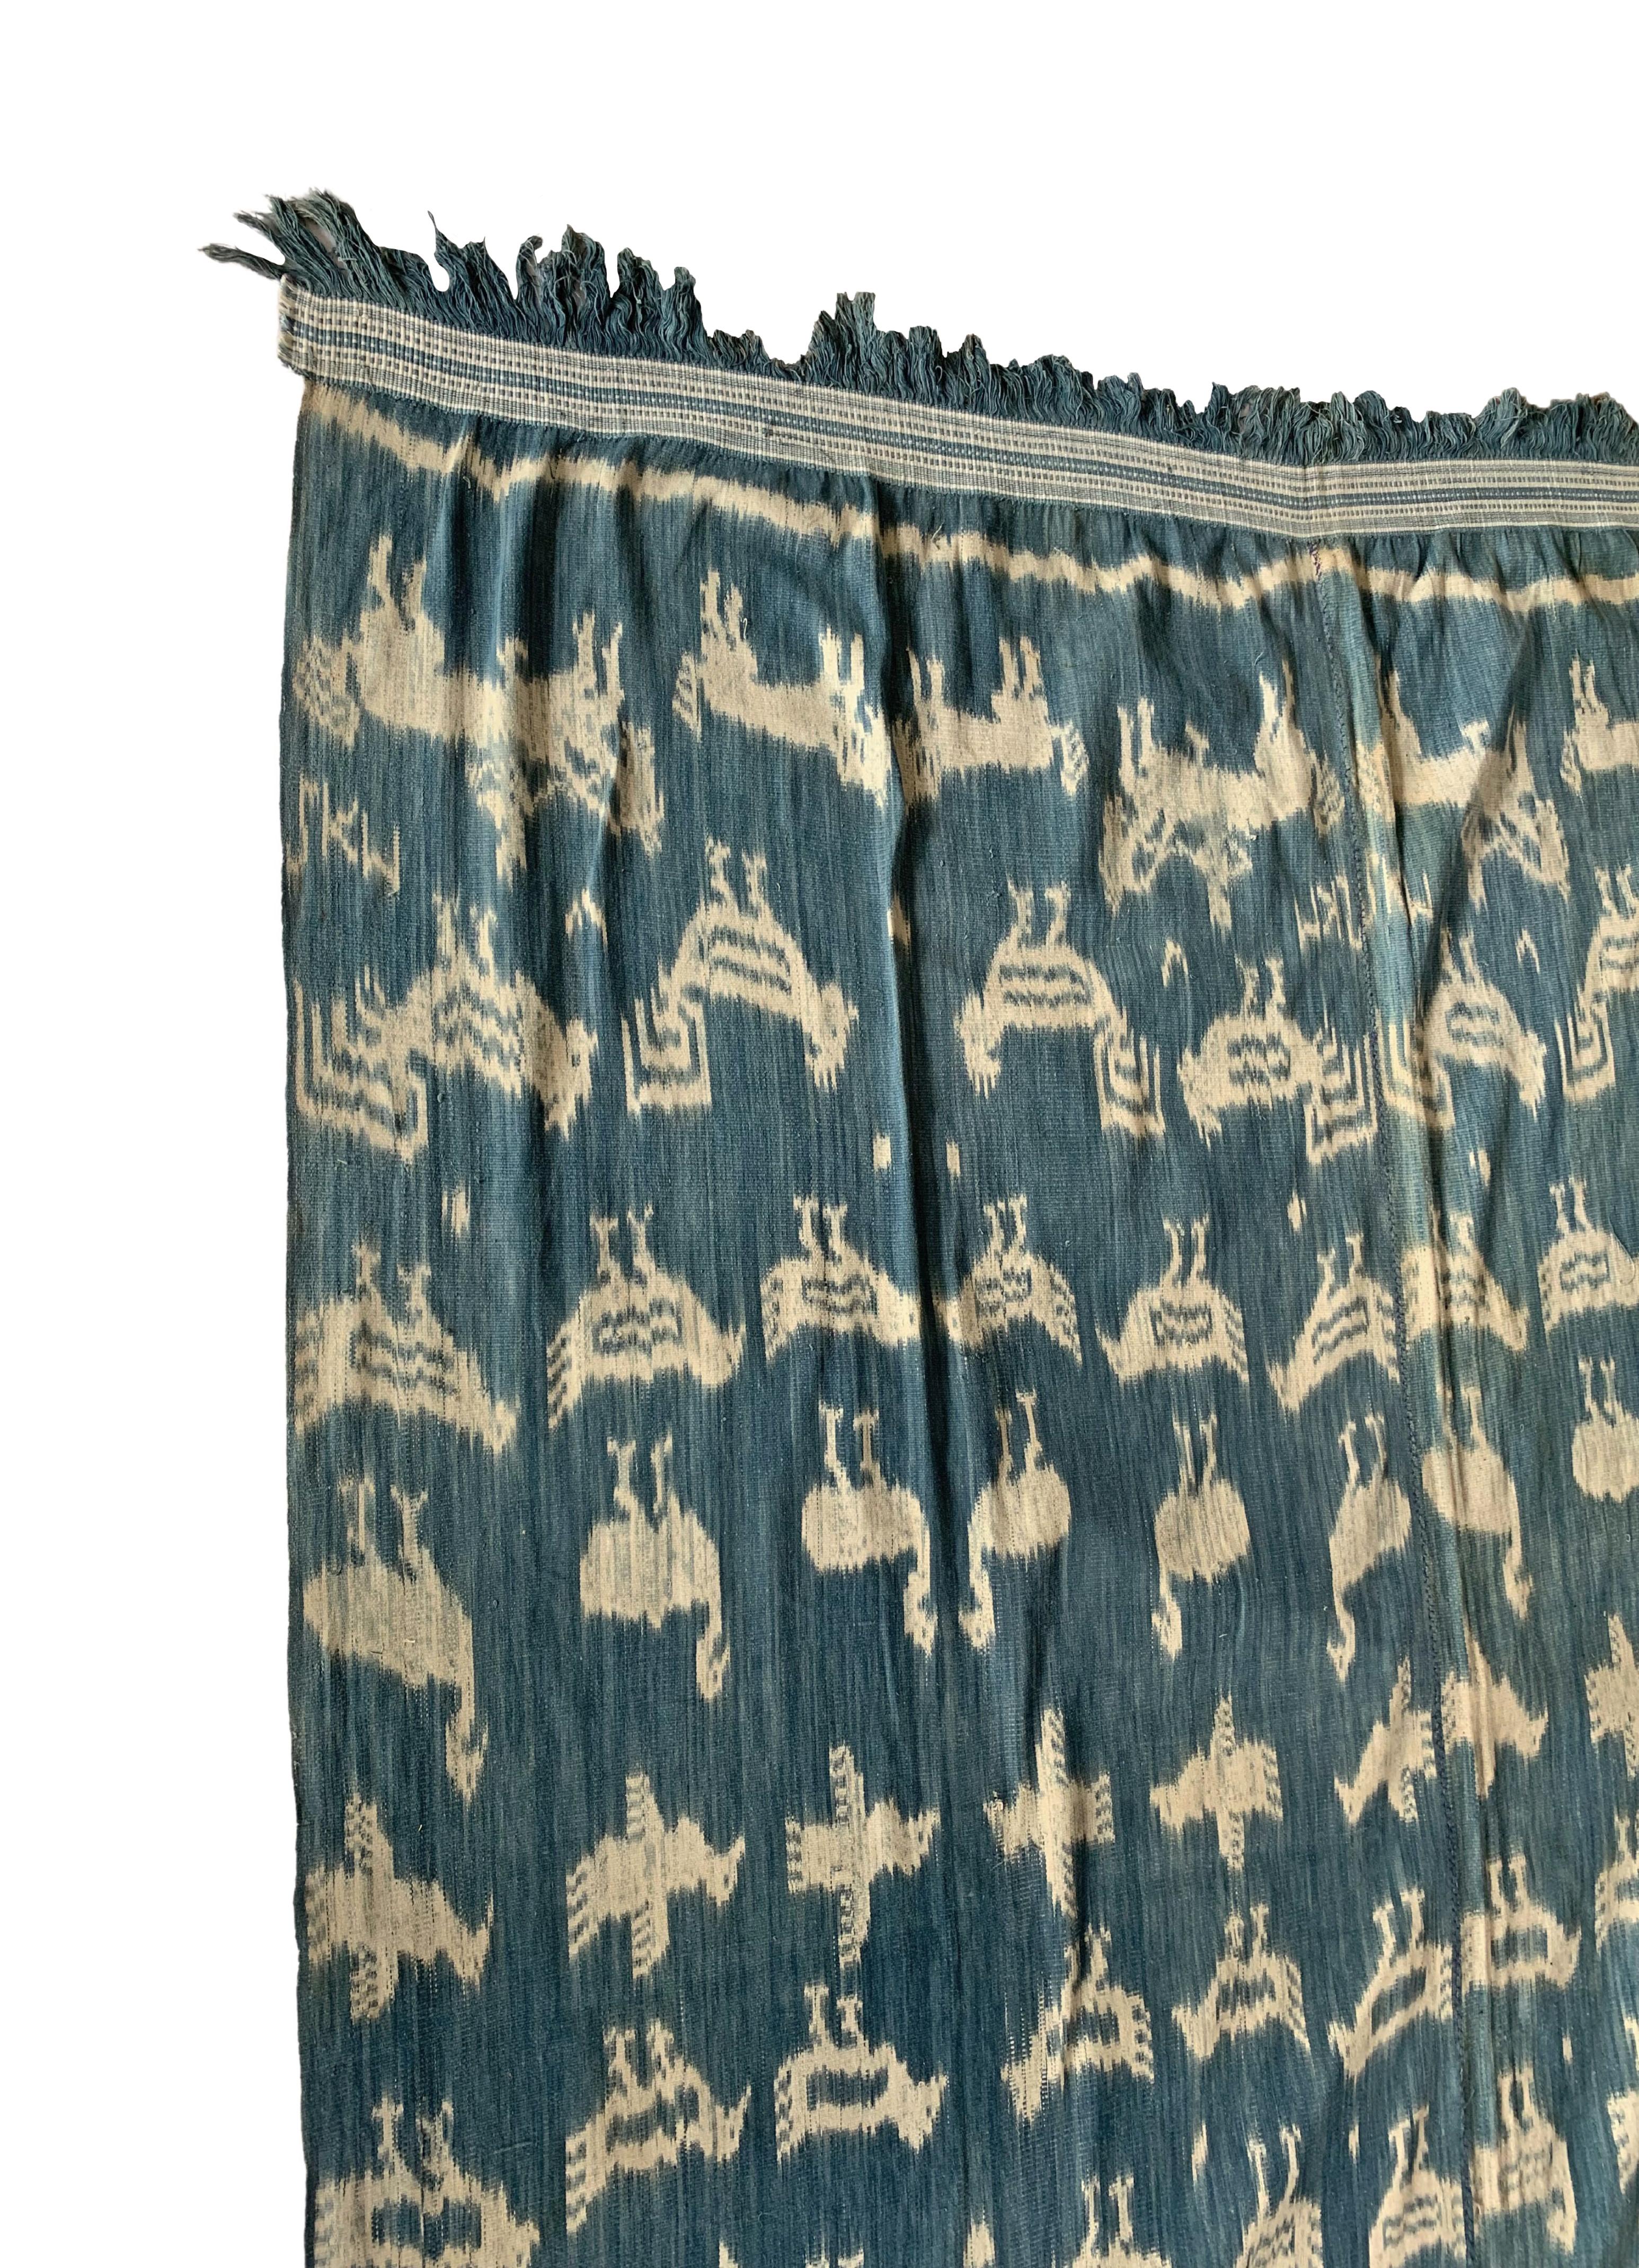 Hand-Woven Extravagant and very long Ikat Textile from Sumba Island, Indonesia